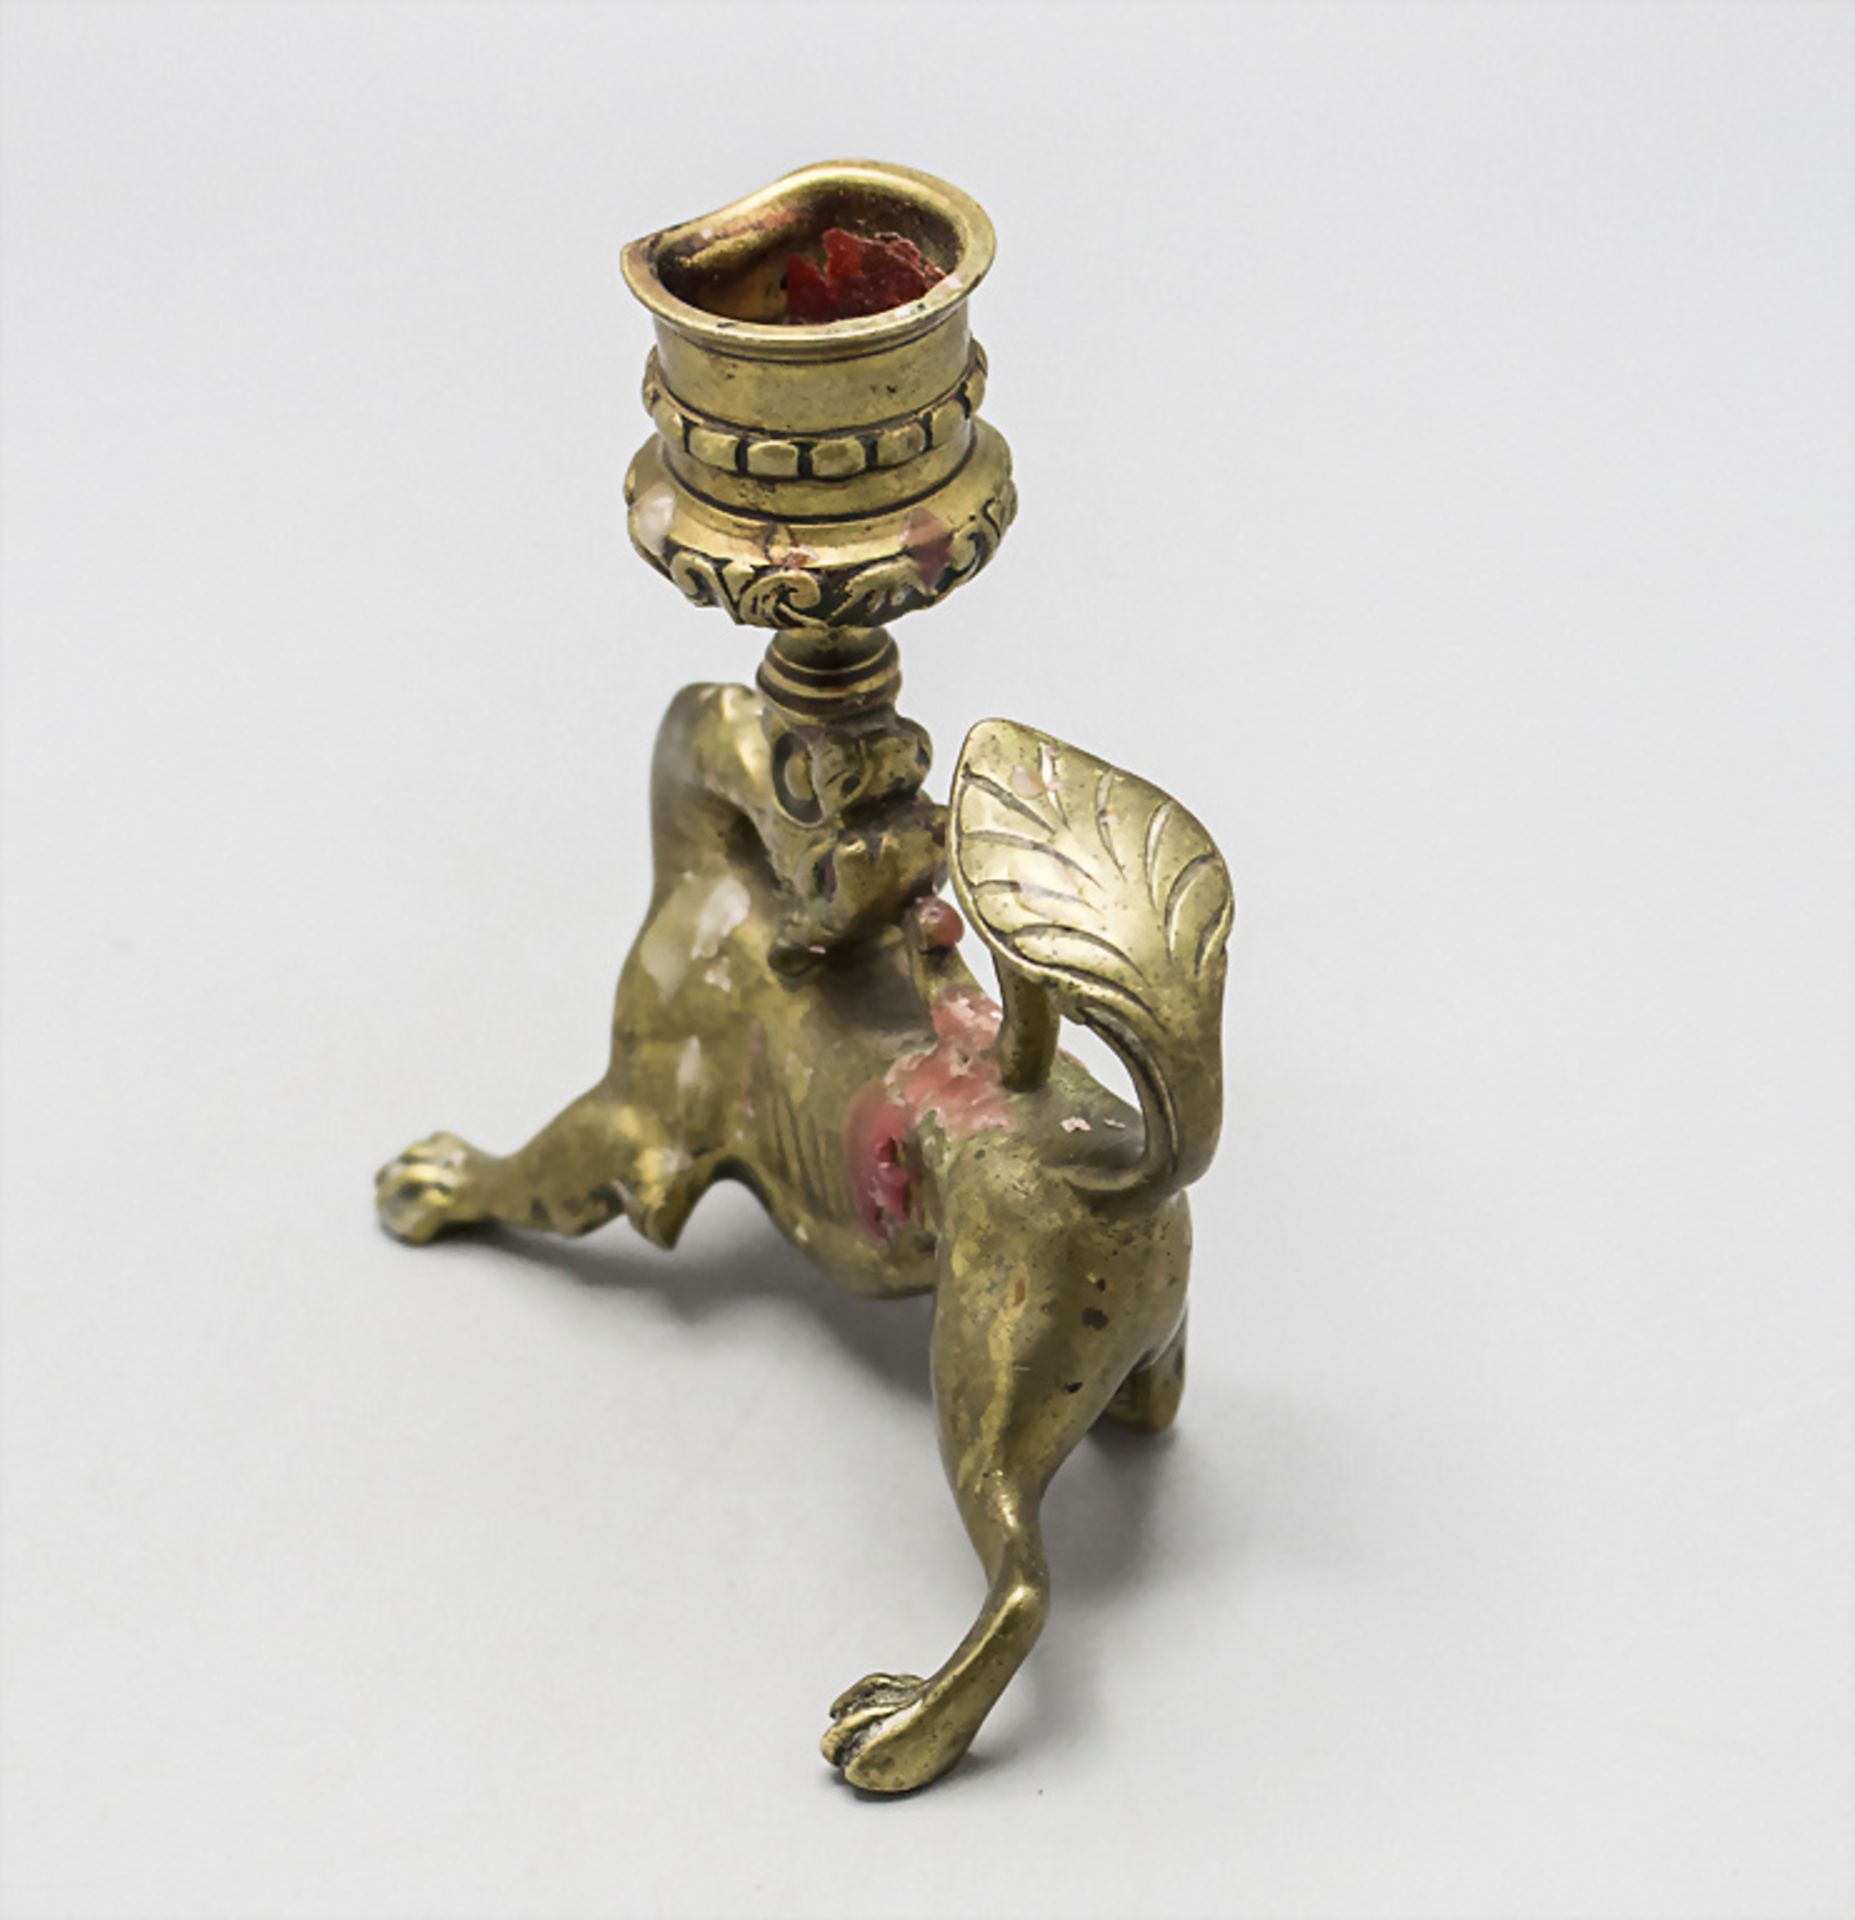 Bronzeleuchter 'Drache' / A bronze candle holder with a dragon, Frankreich, 19. Jh. - Image 4 of 5